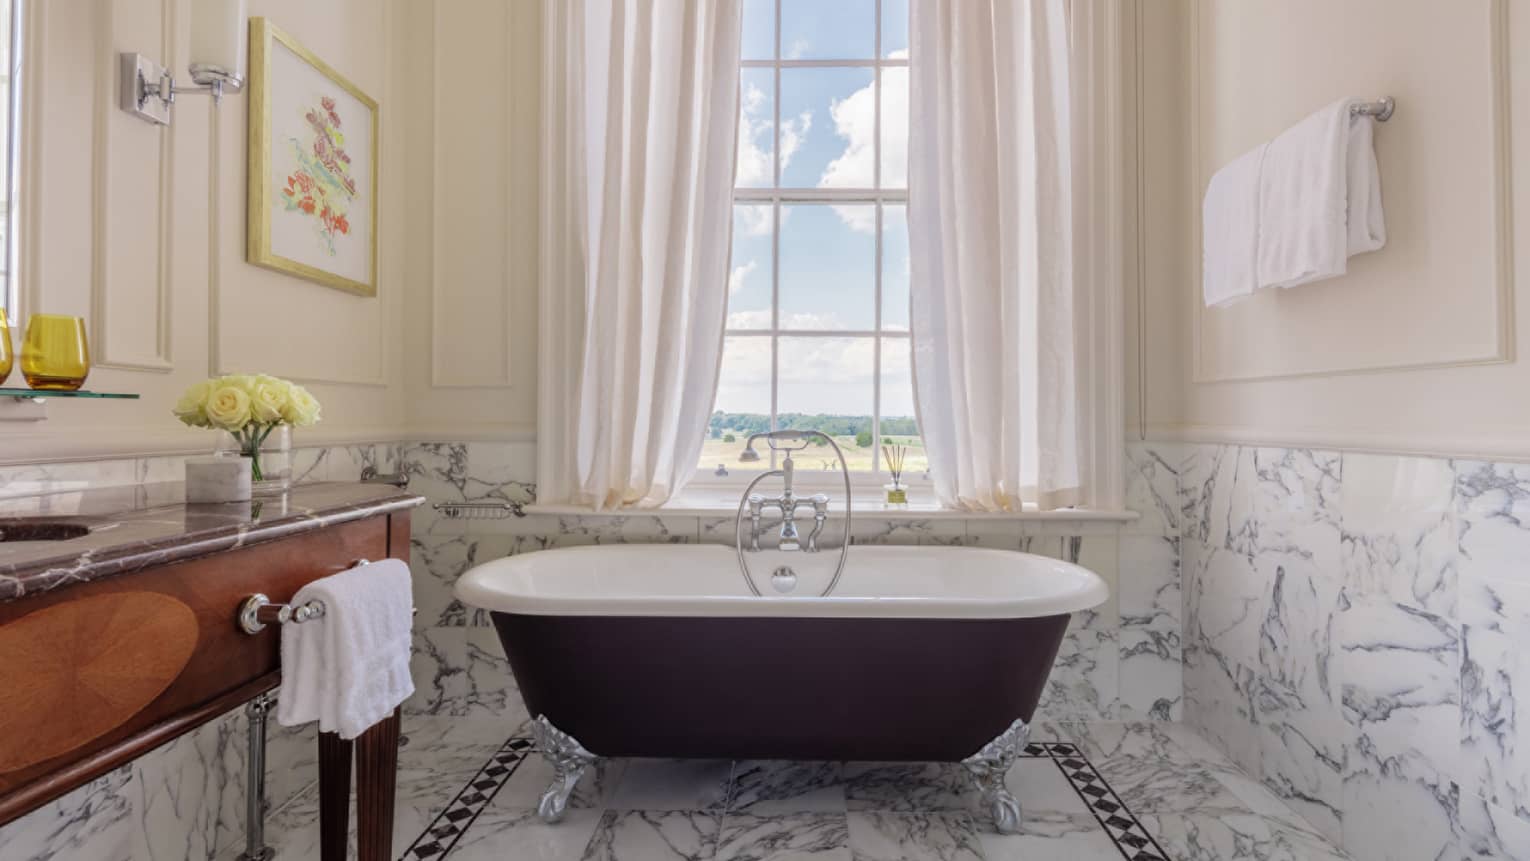 Bathroom with marble accents, large clawfoot tub, wooden vanity, window with white drapes